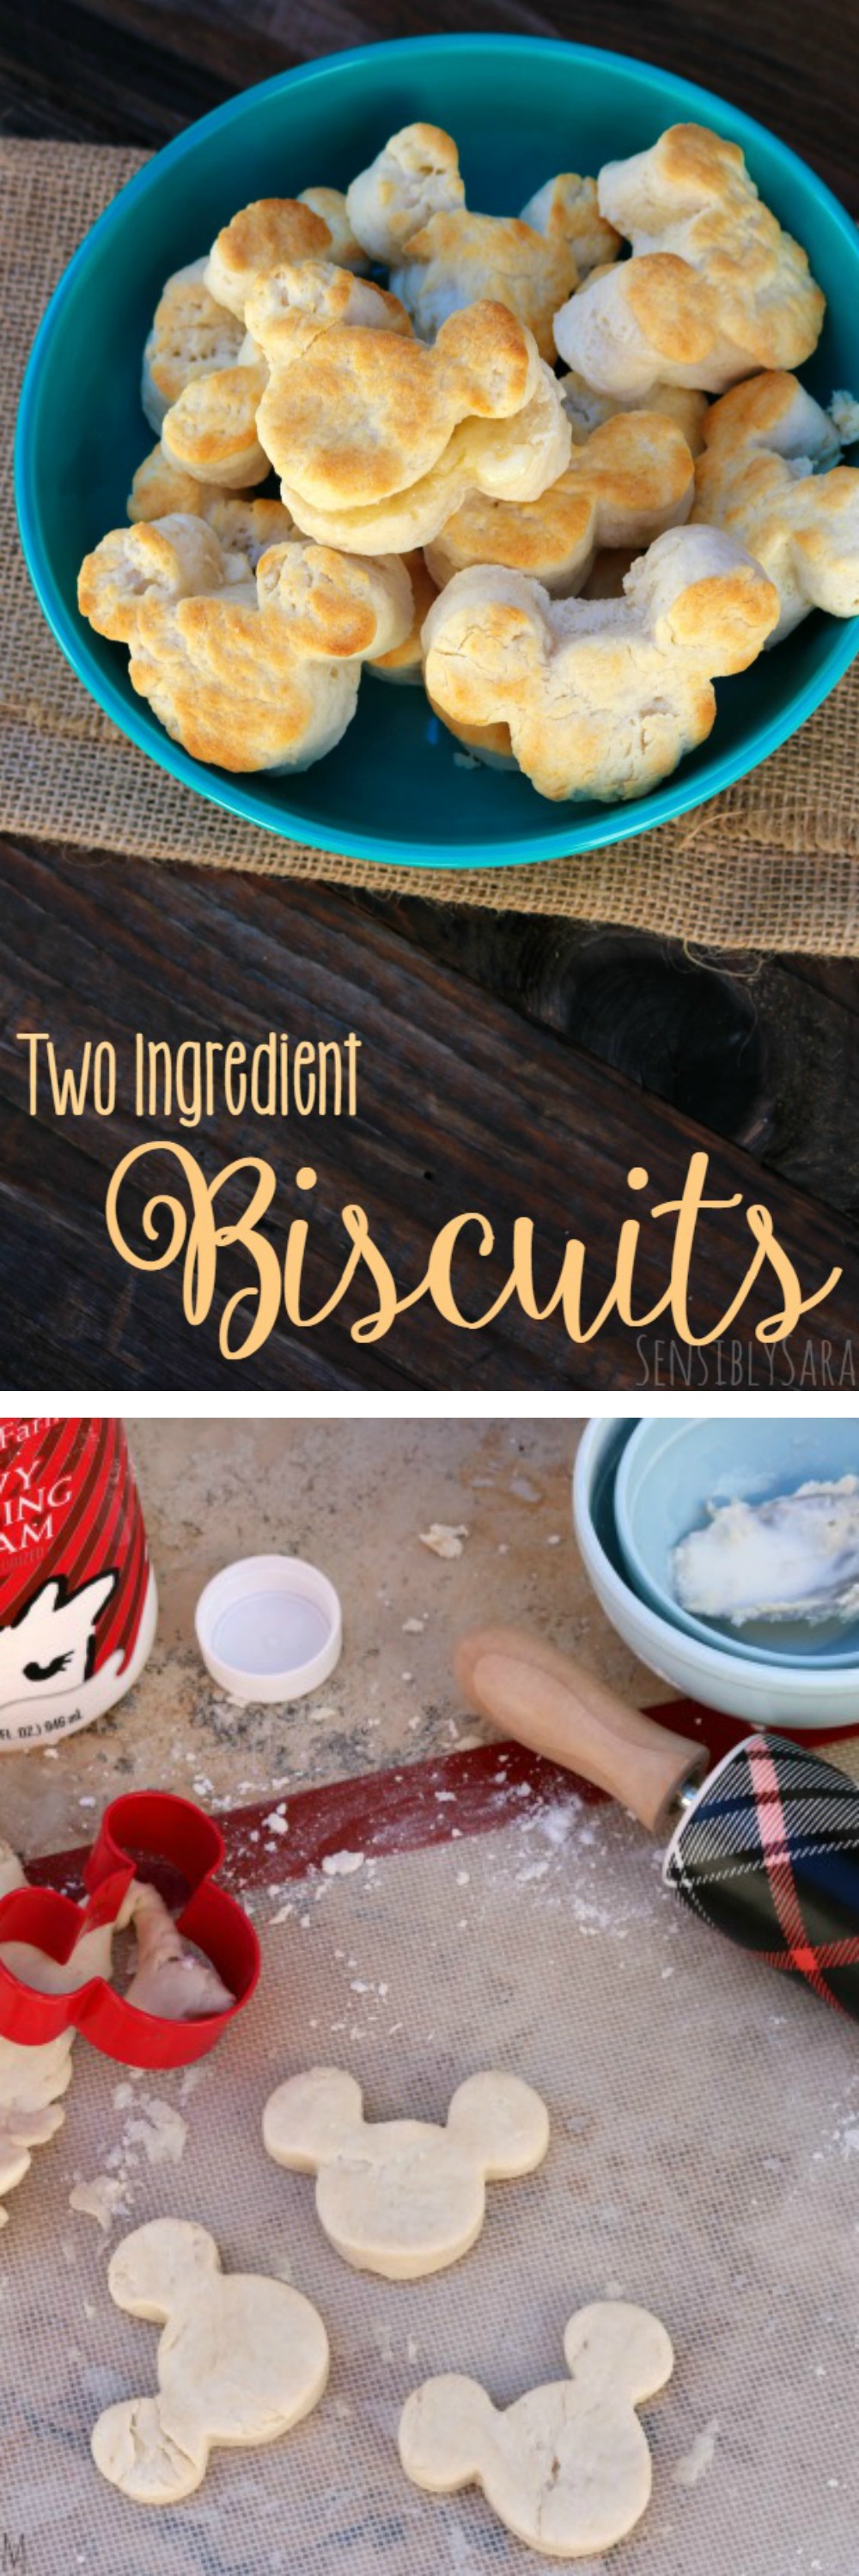 Two-Ingredient Biscuits #Recipe for ALL Occasions! | SensiblySara.com